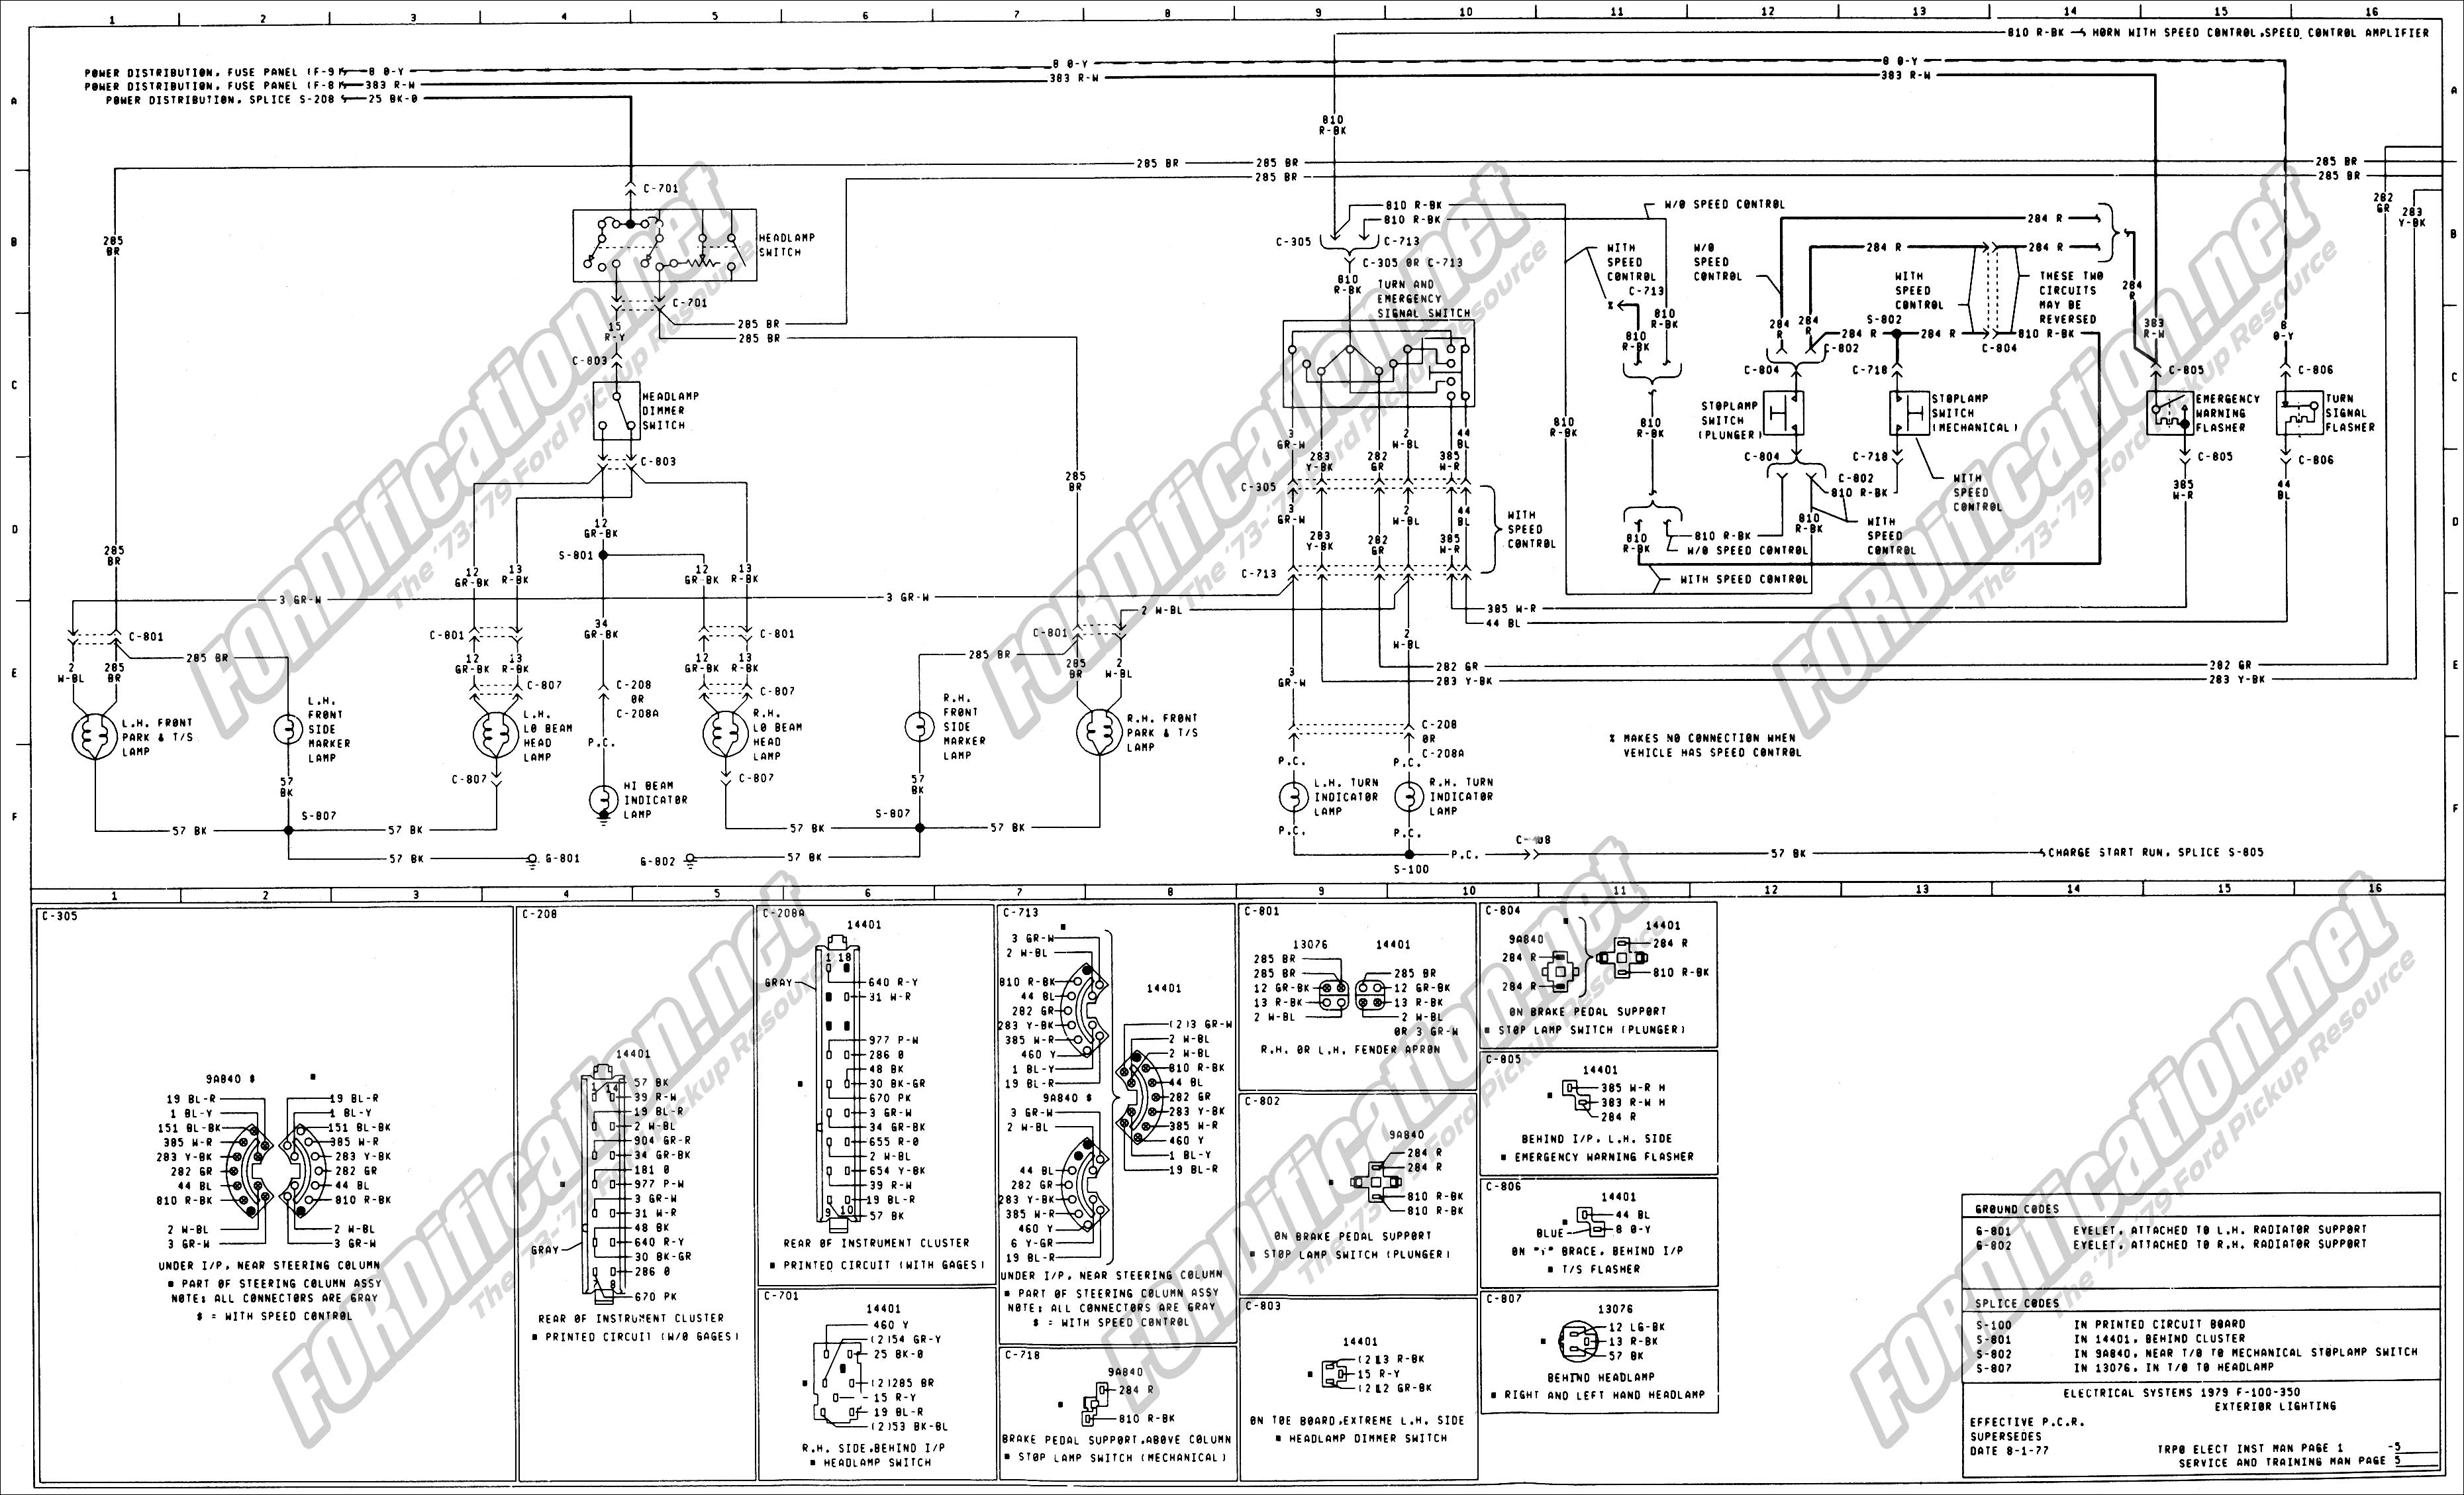 Wiring diagrams for 1979 ford truck #6